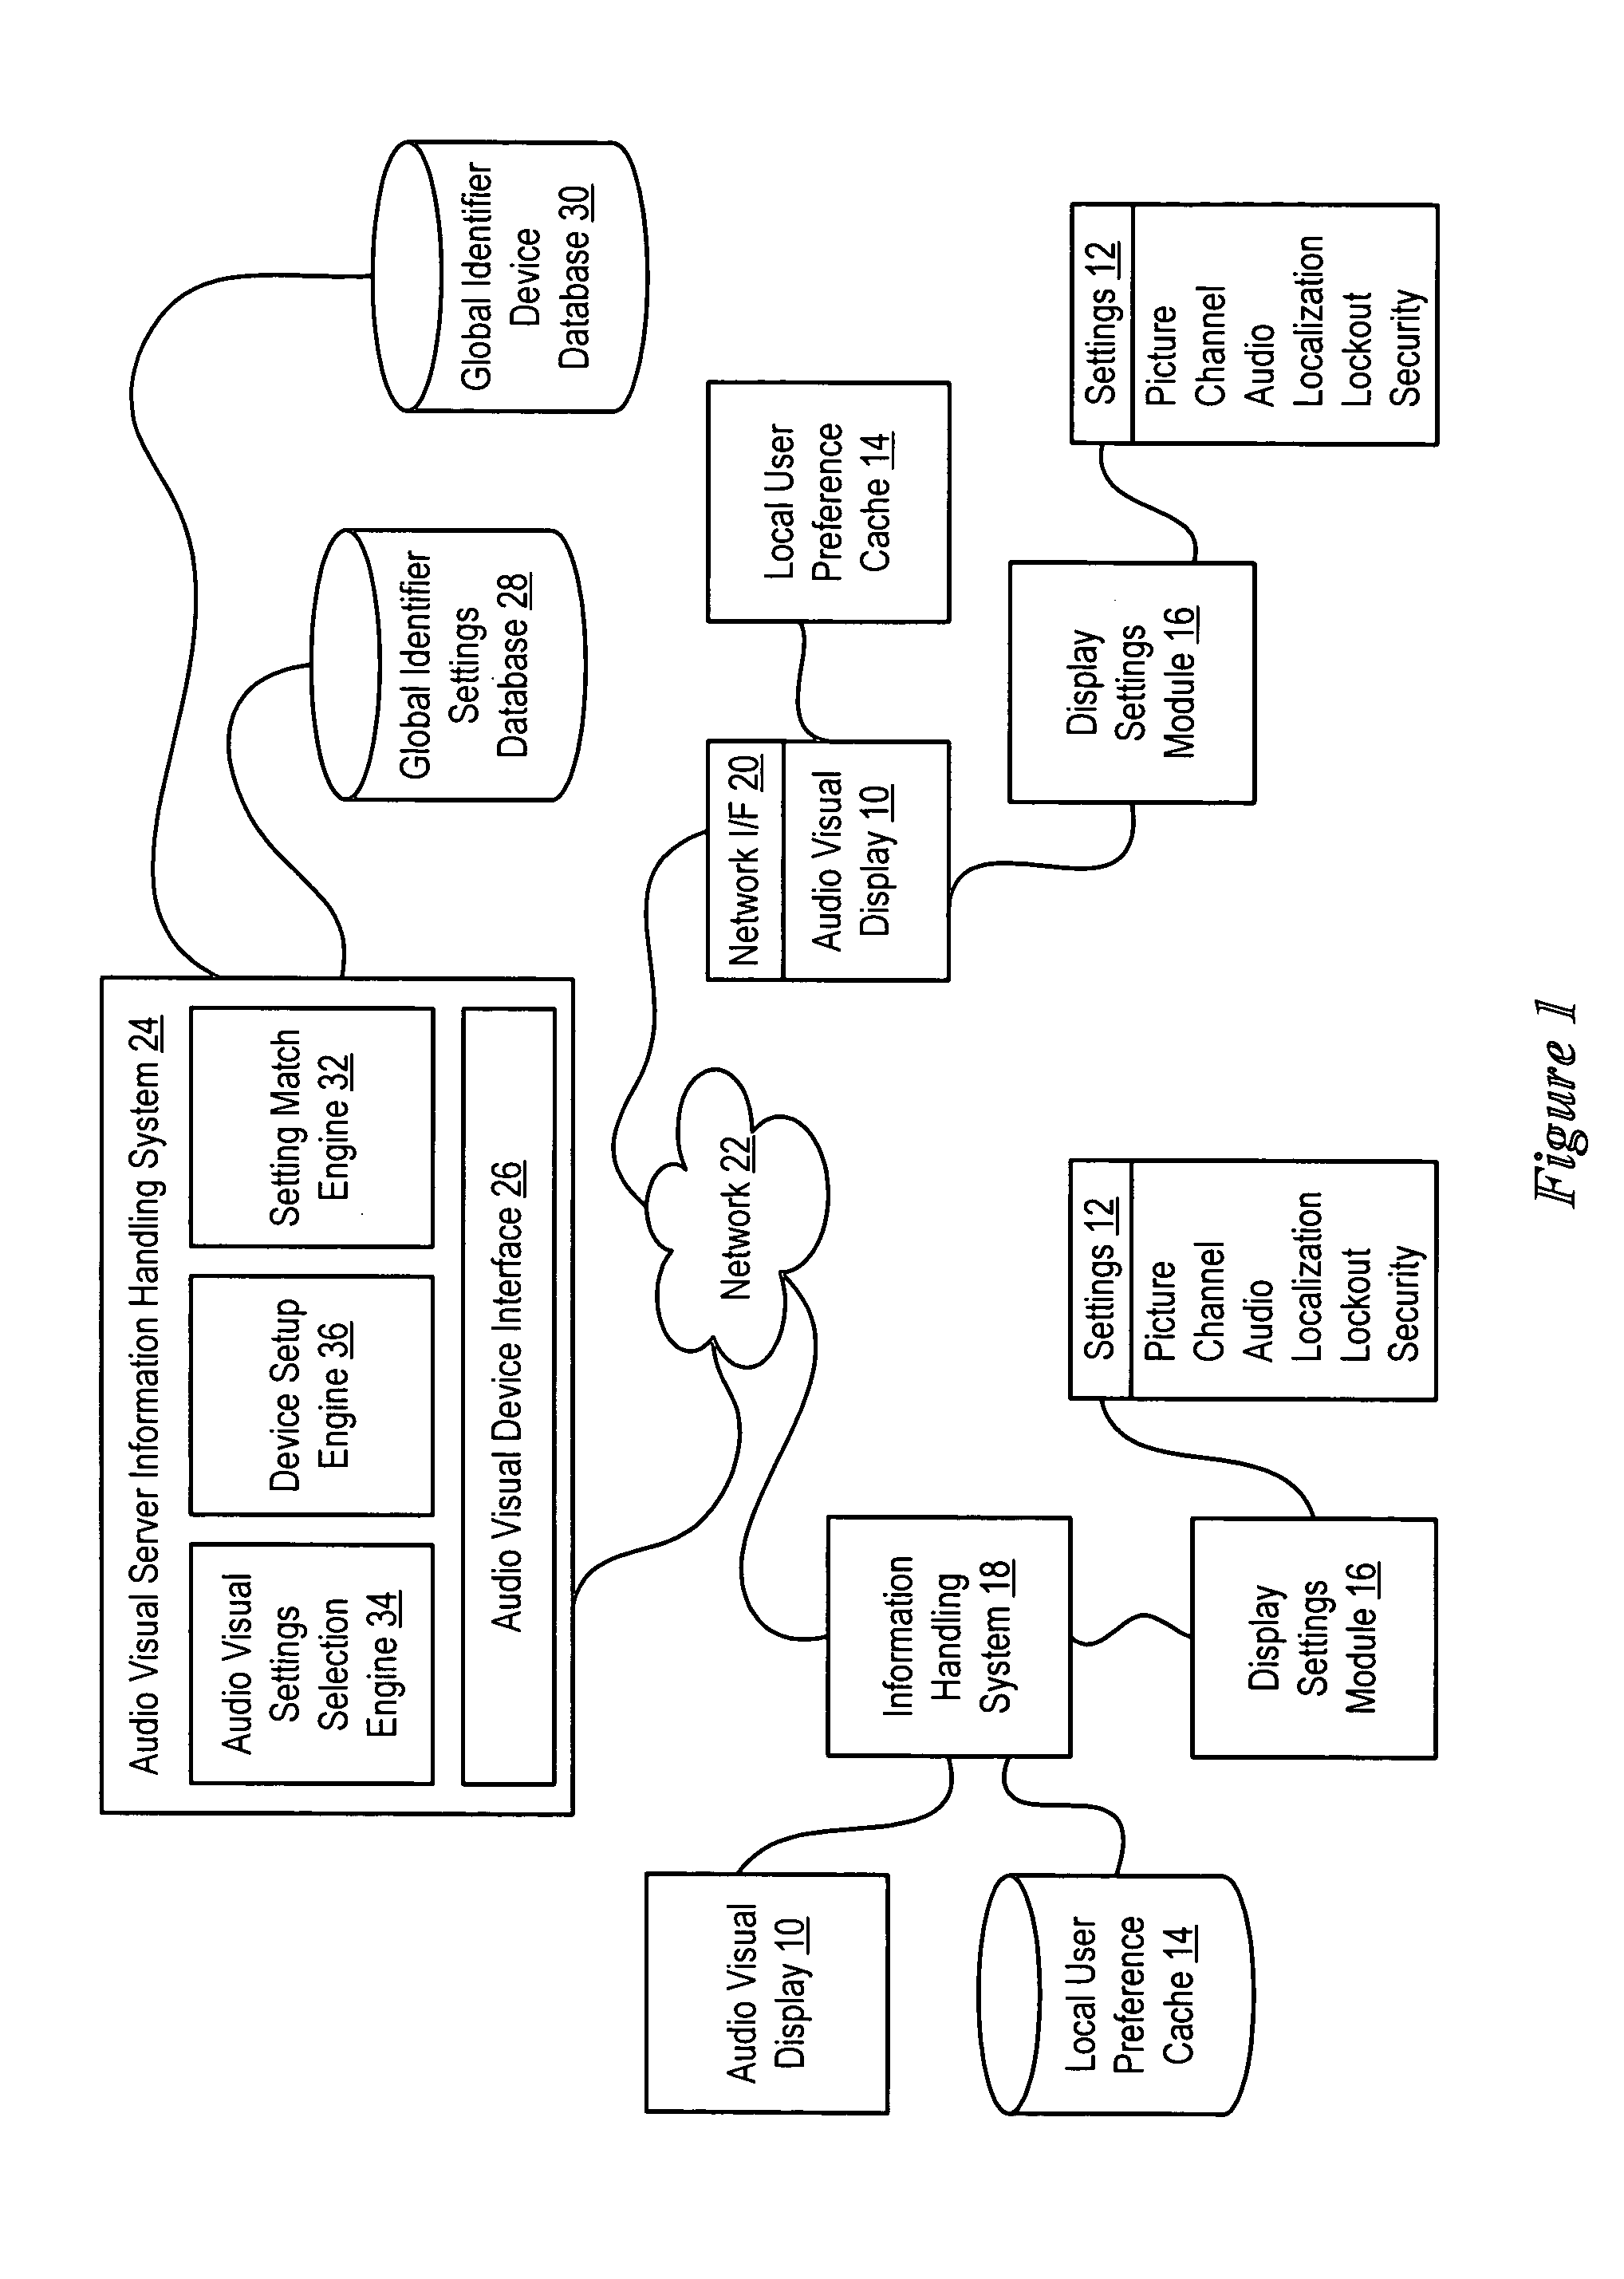 System and method for audiovisual display settings